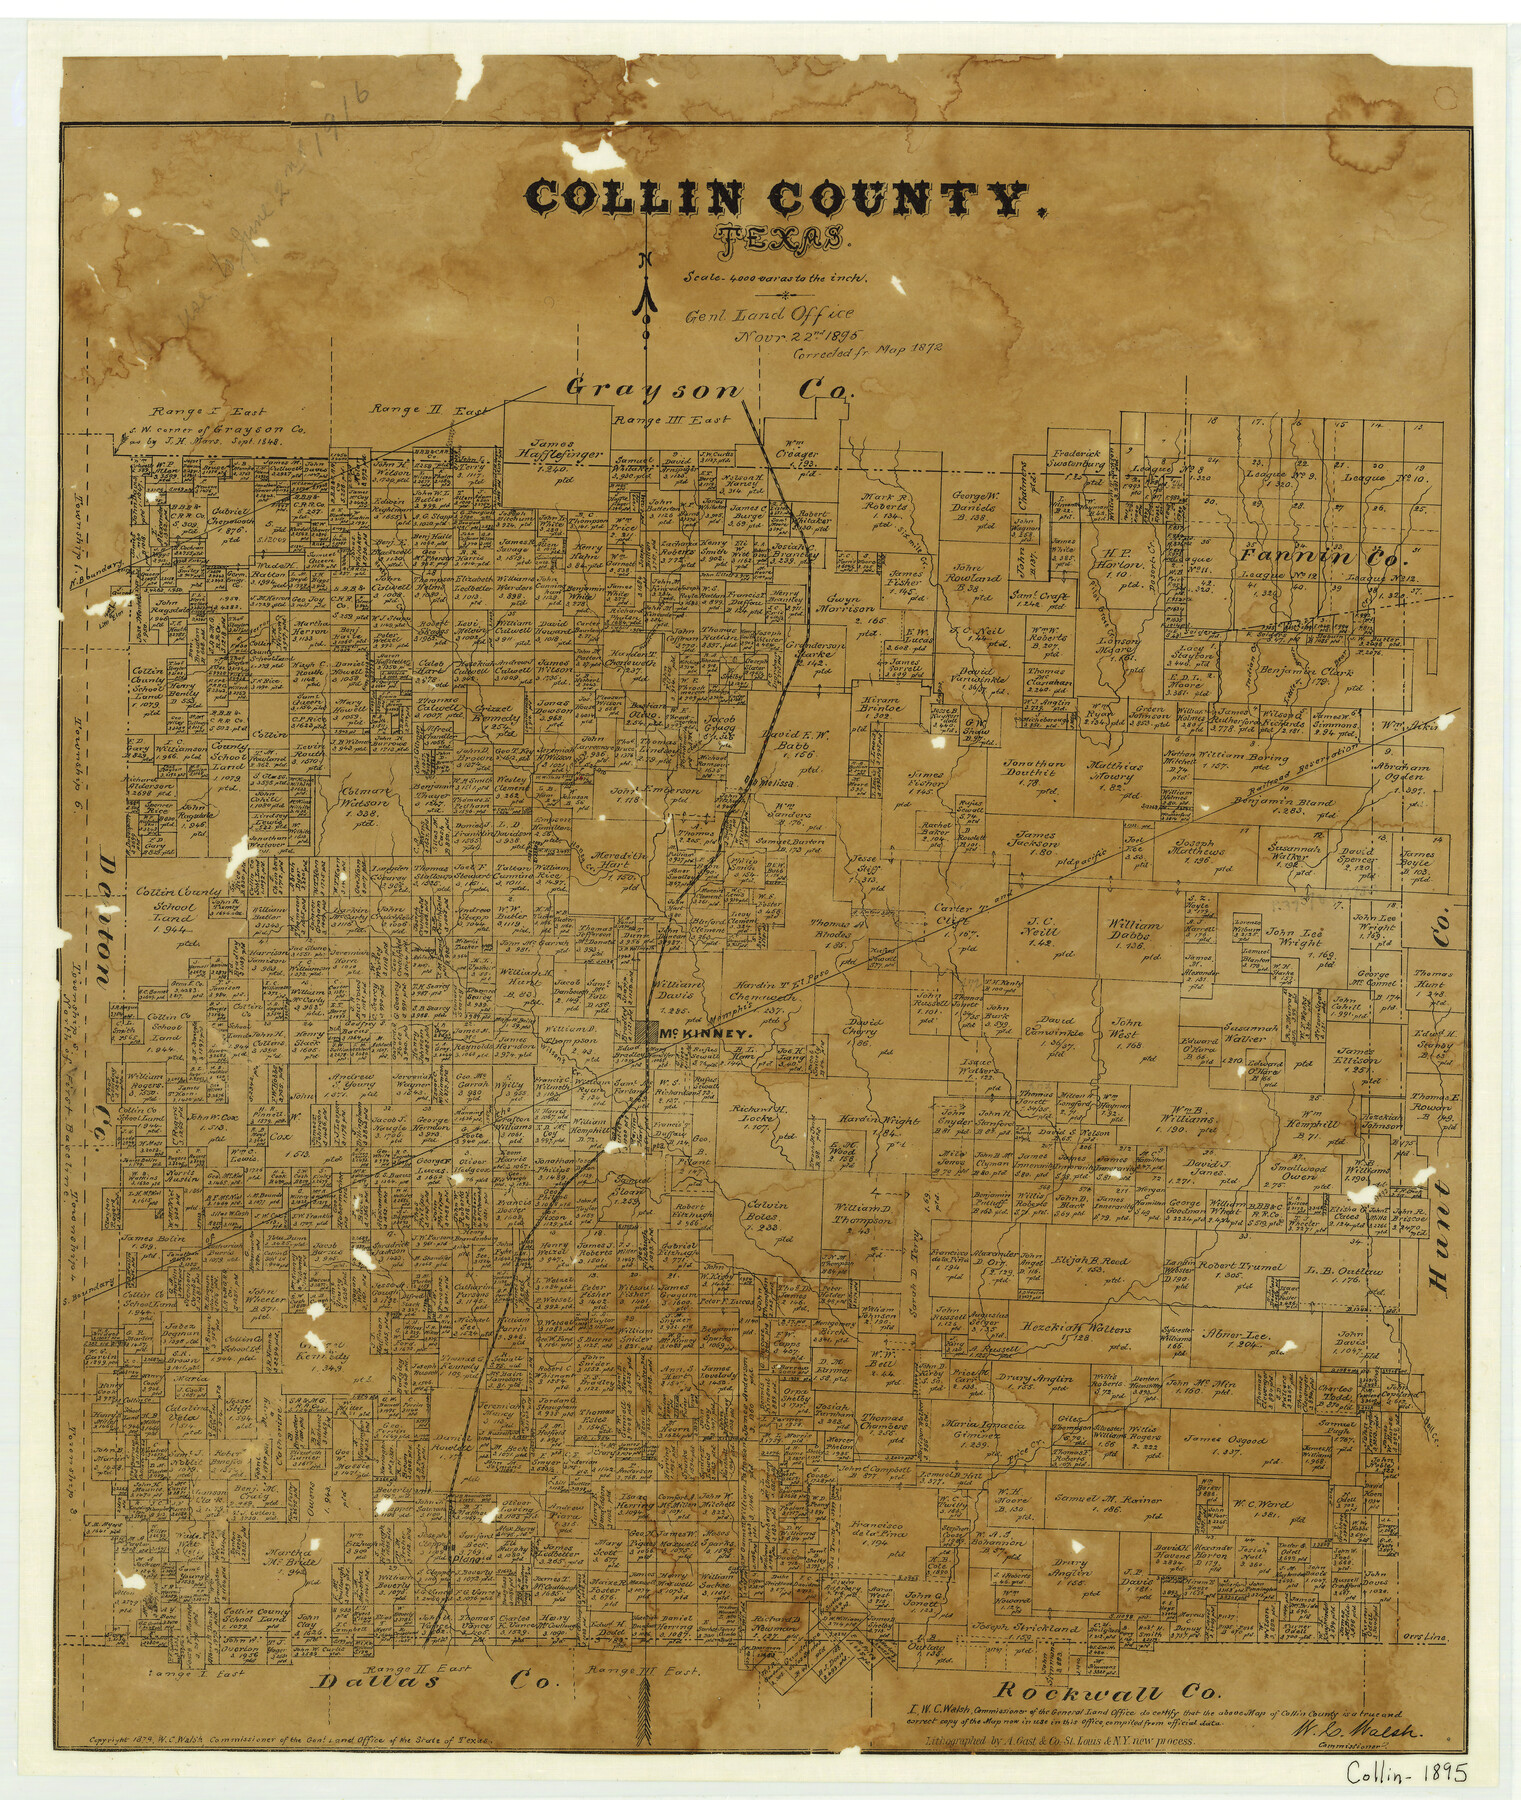 794, Collin County Texas, General Map Collection